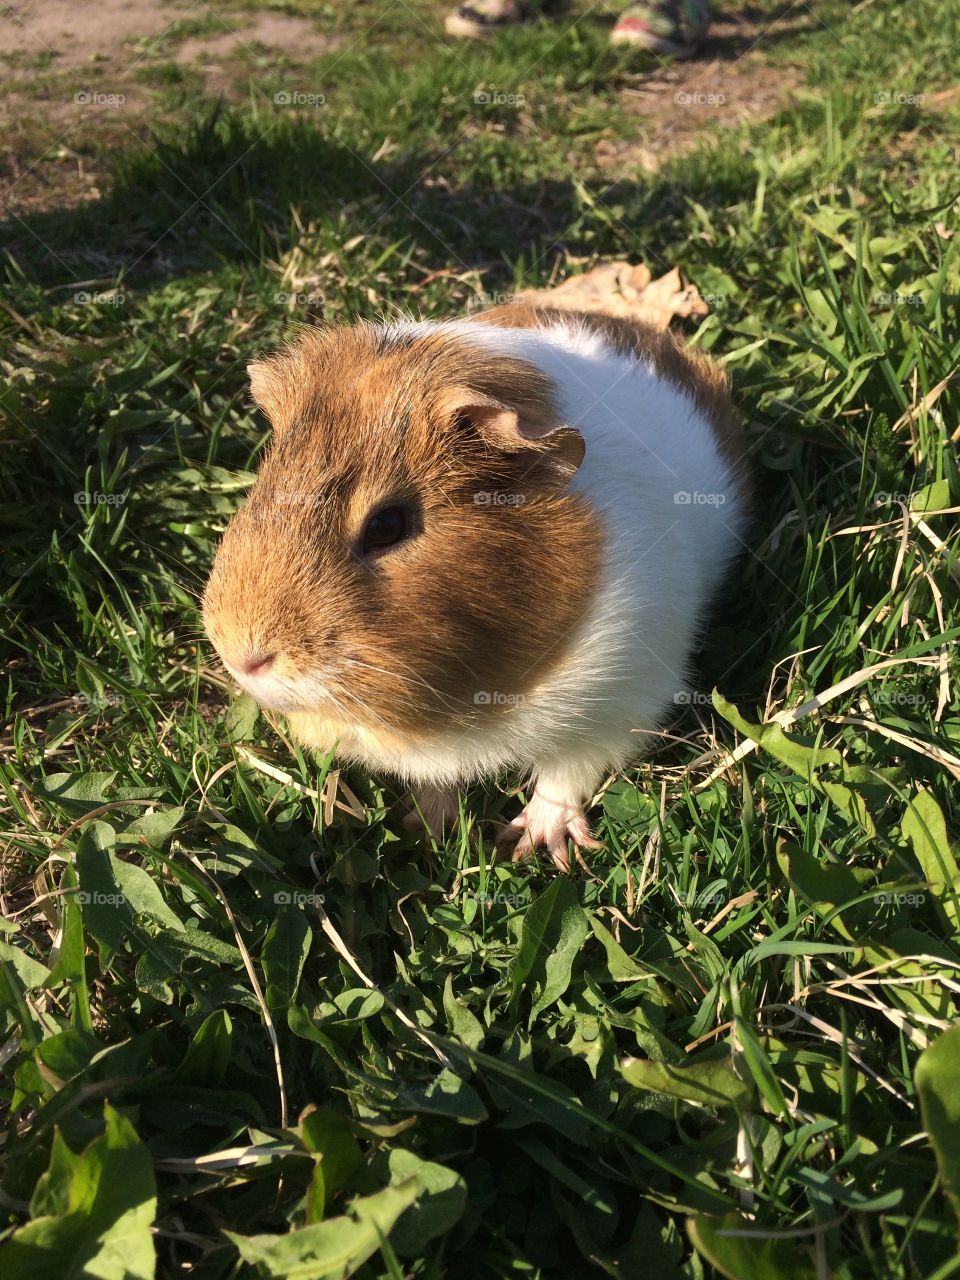 Guinea pig outside on the grass